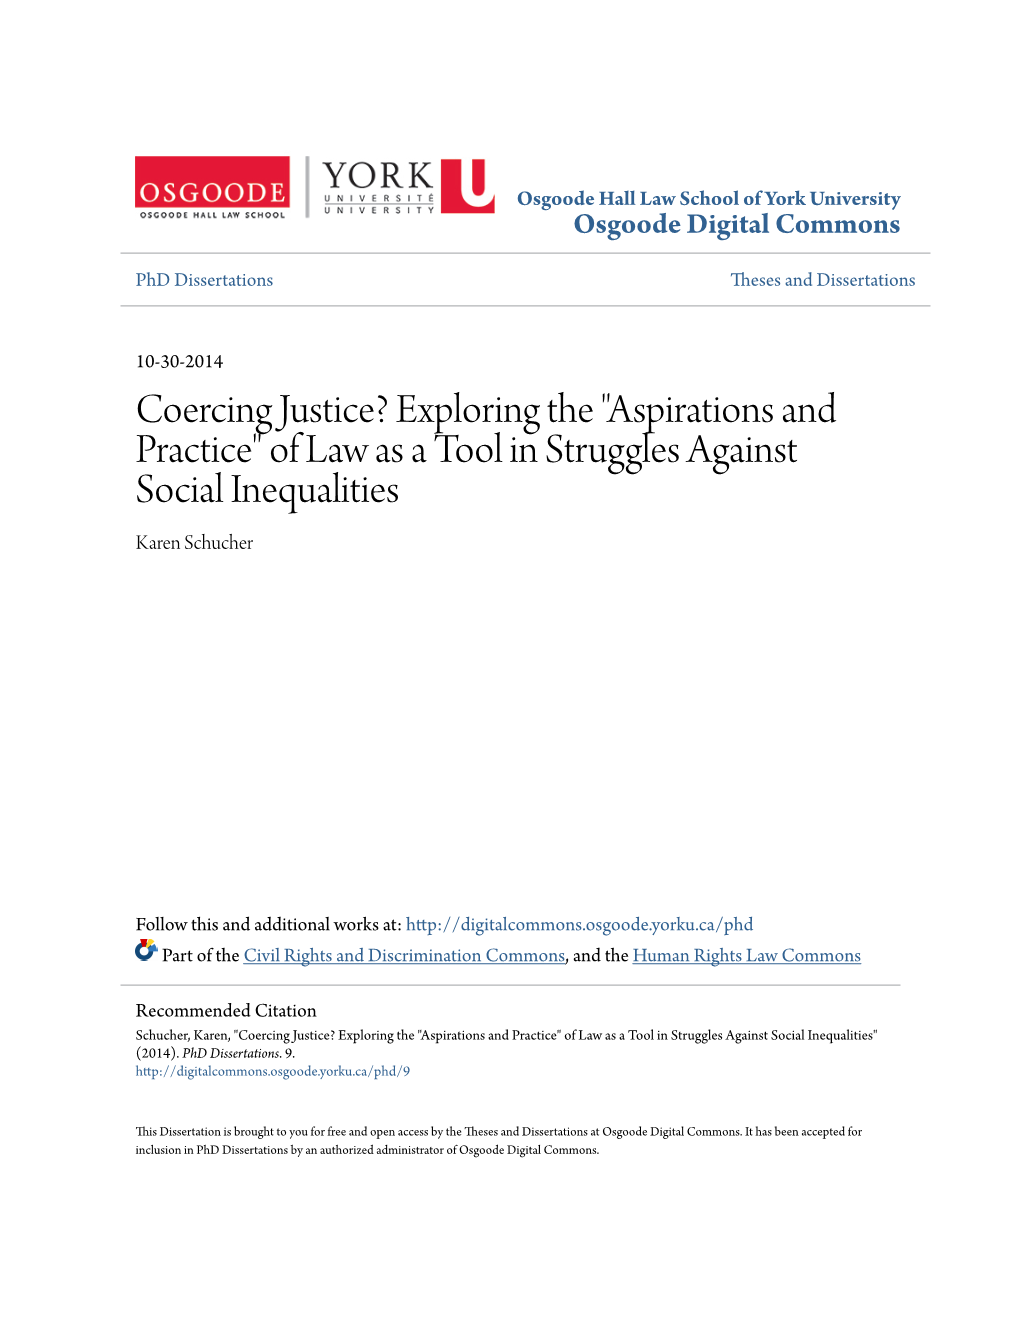 Exploring the "Aspirations and Practice" of Law As a Tool in Struggles Against Social Inequalities Karen Schucher